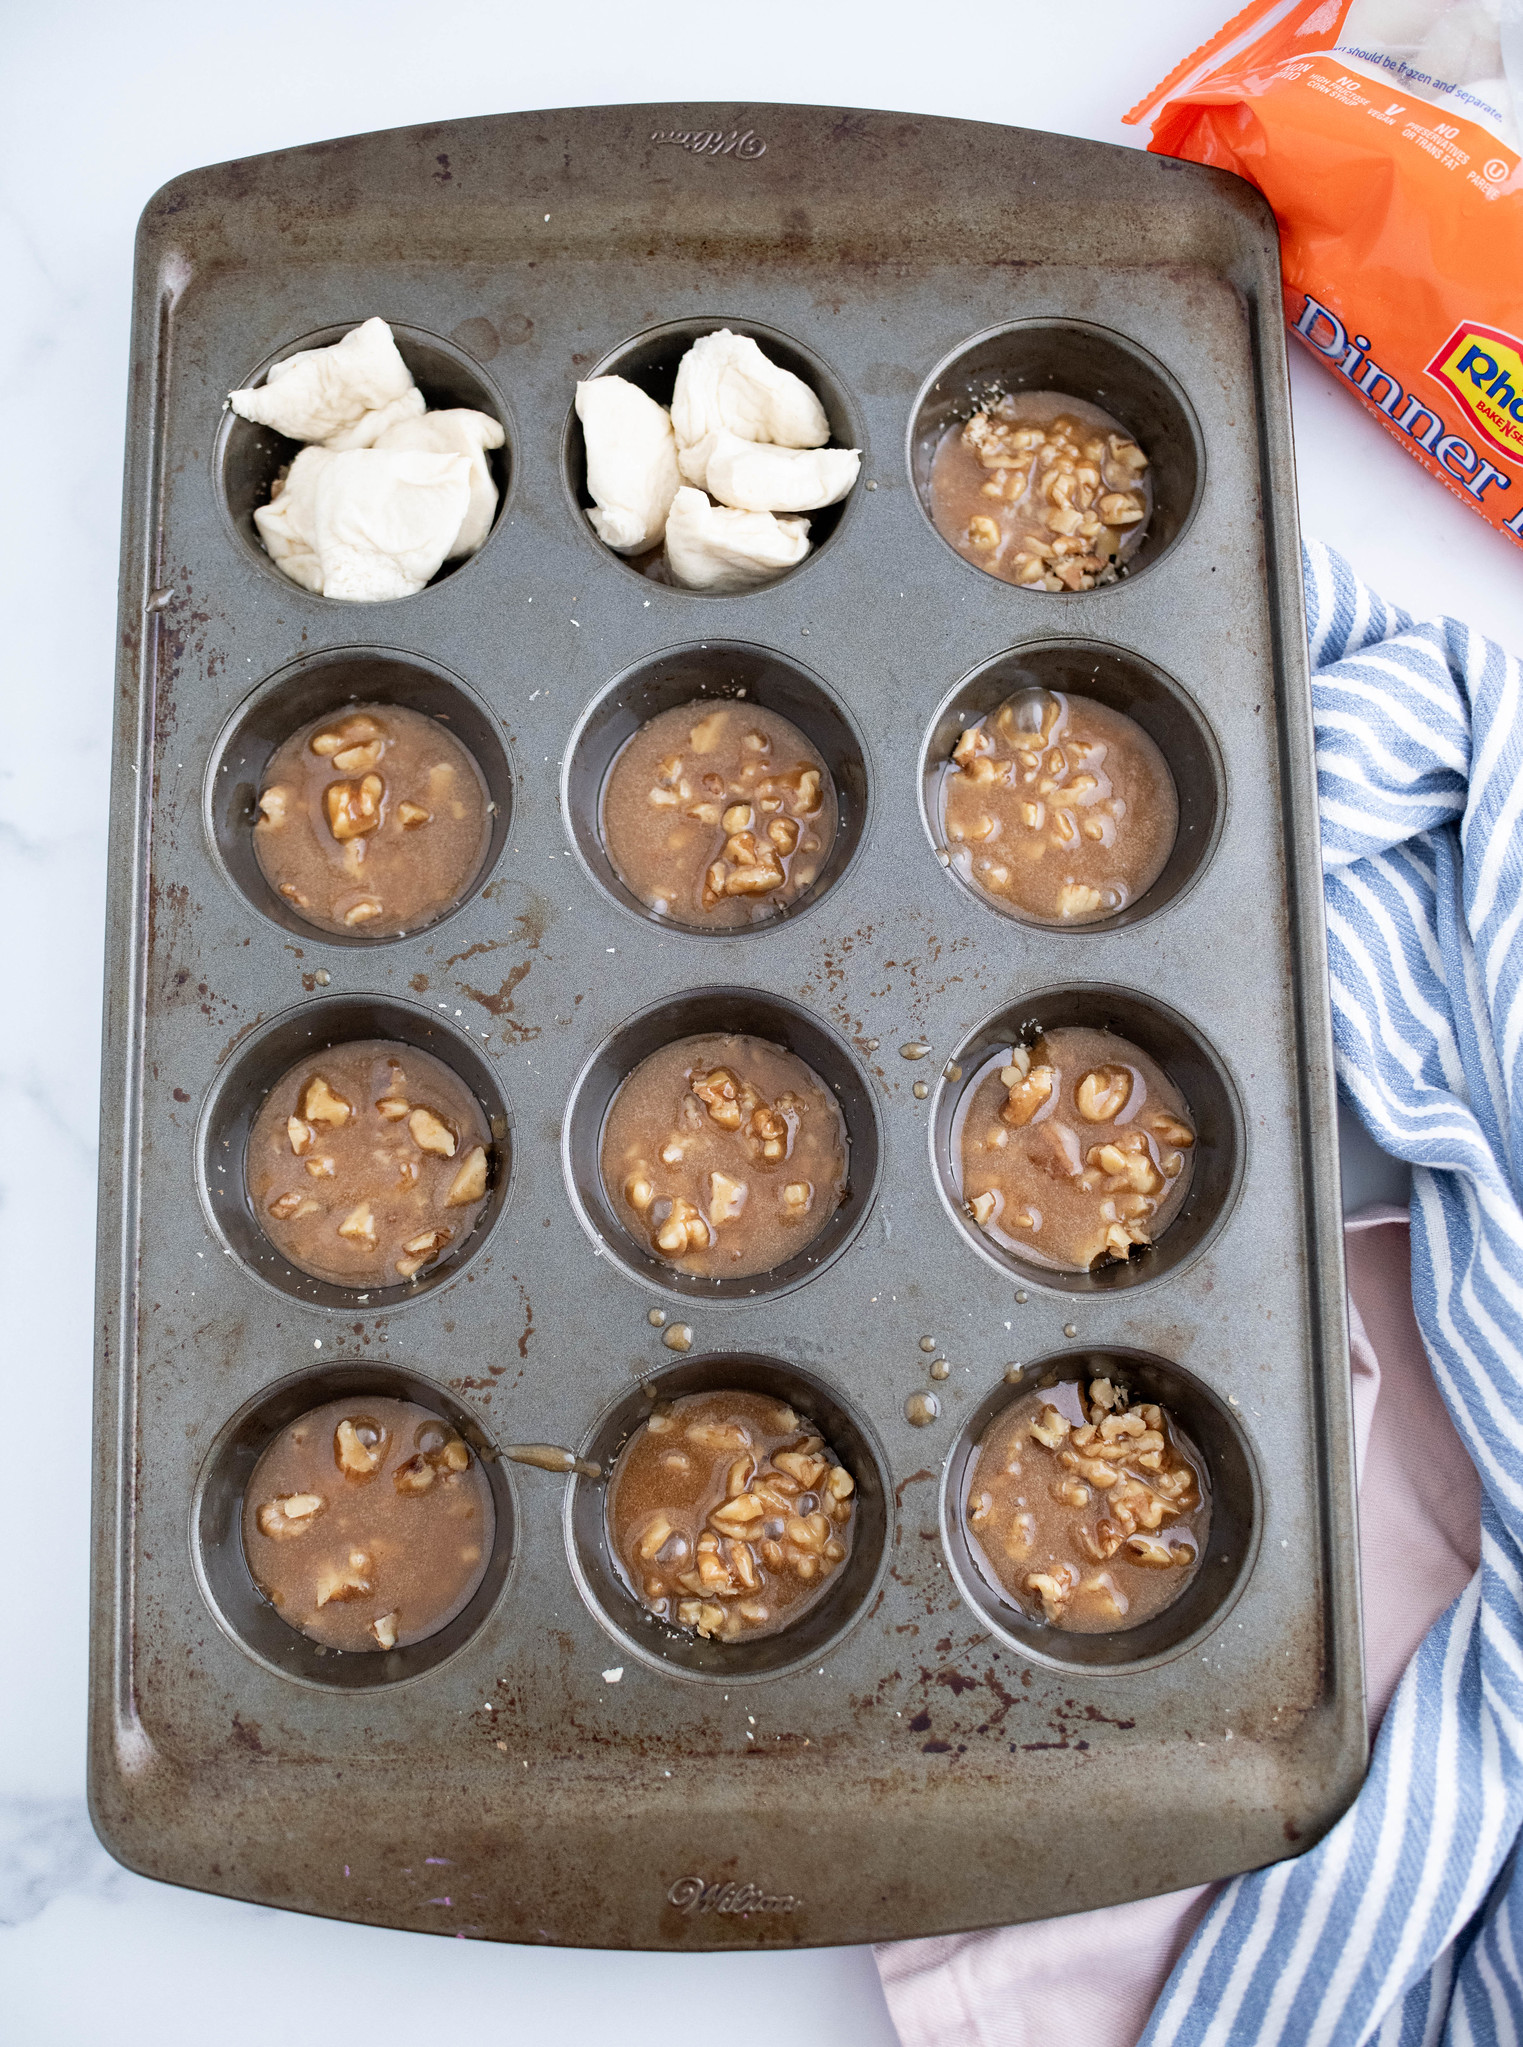 Muffin pan with pecans and caramel in each muffin cup. Pieces of bread dough in two of the muffin cups.